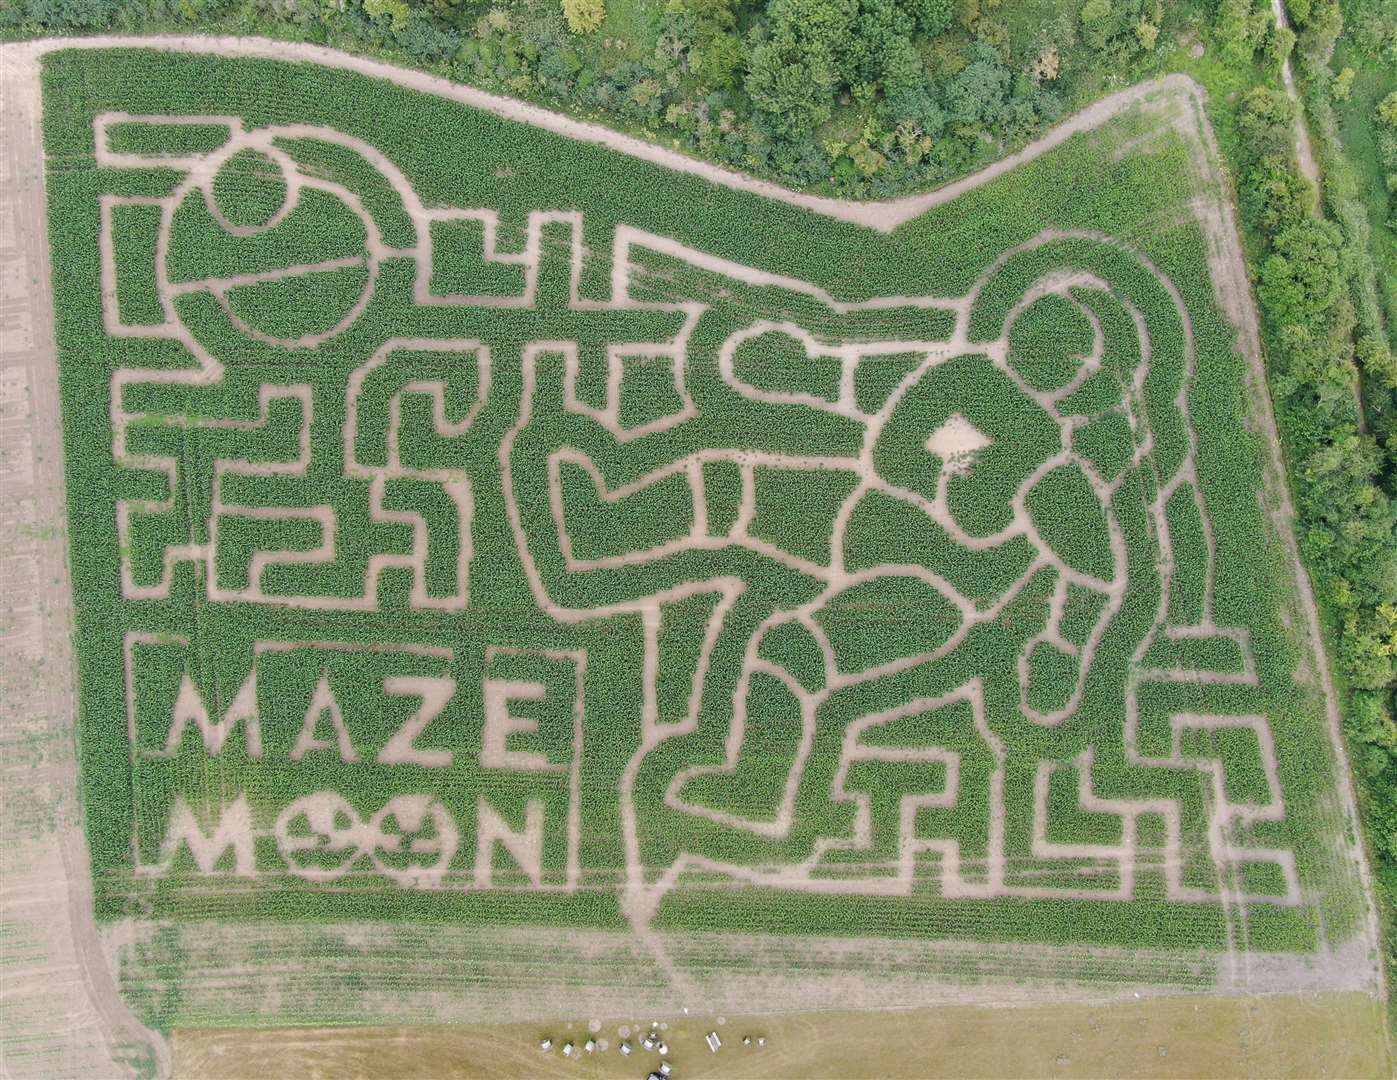 The maze in Rainham features an astronaut as part of its space-themed maze. Photo: James Kemsley